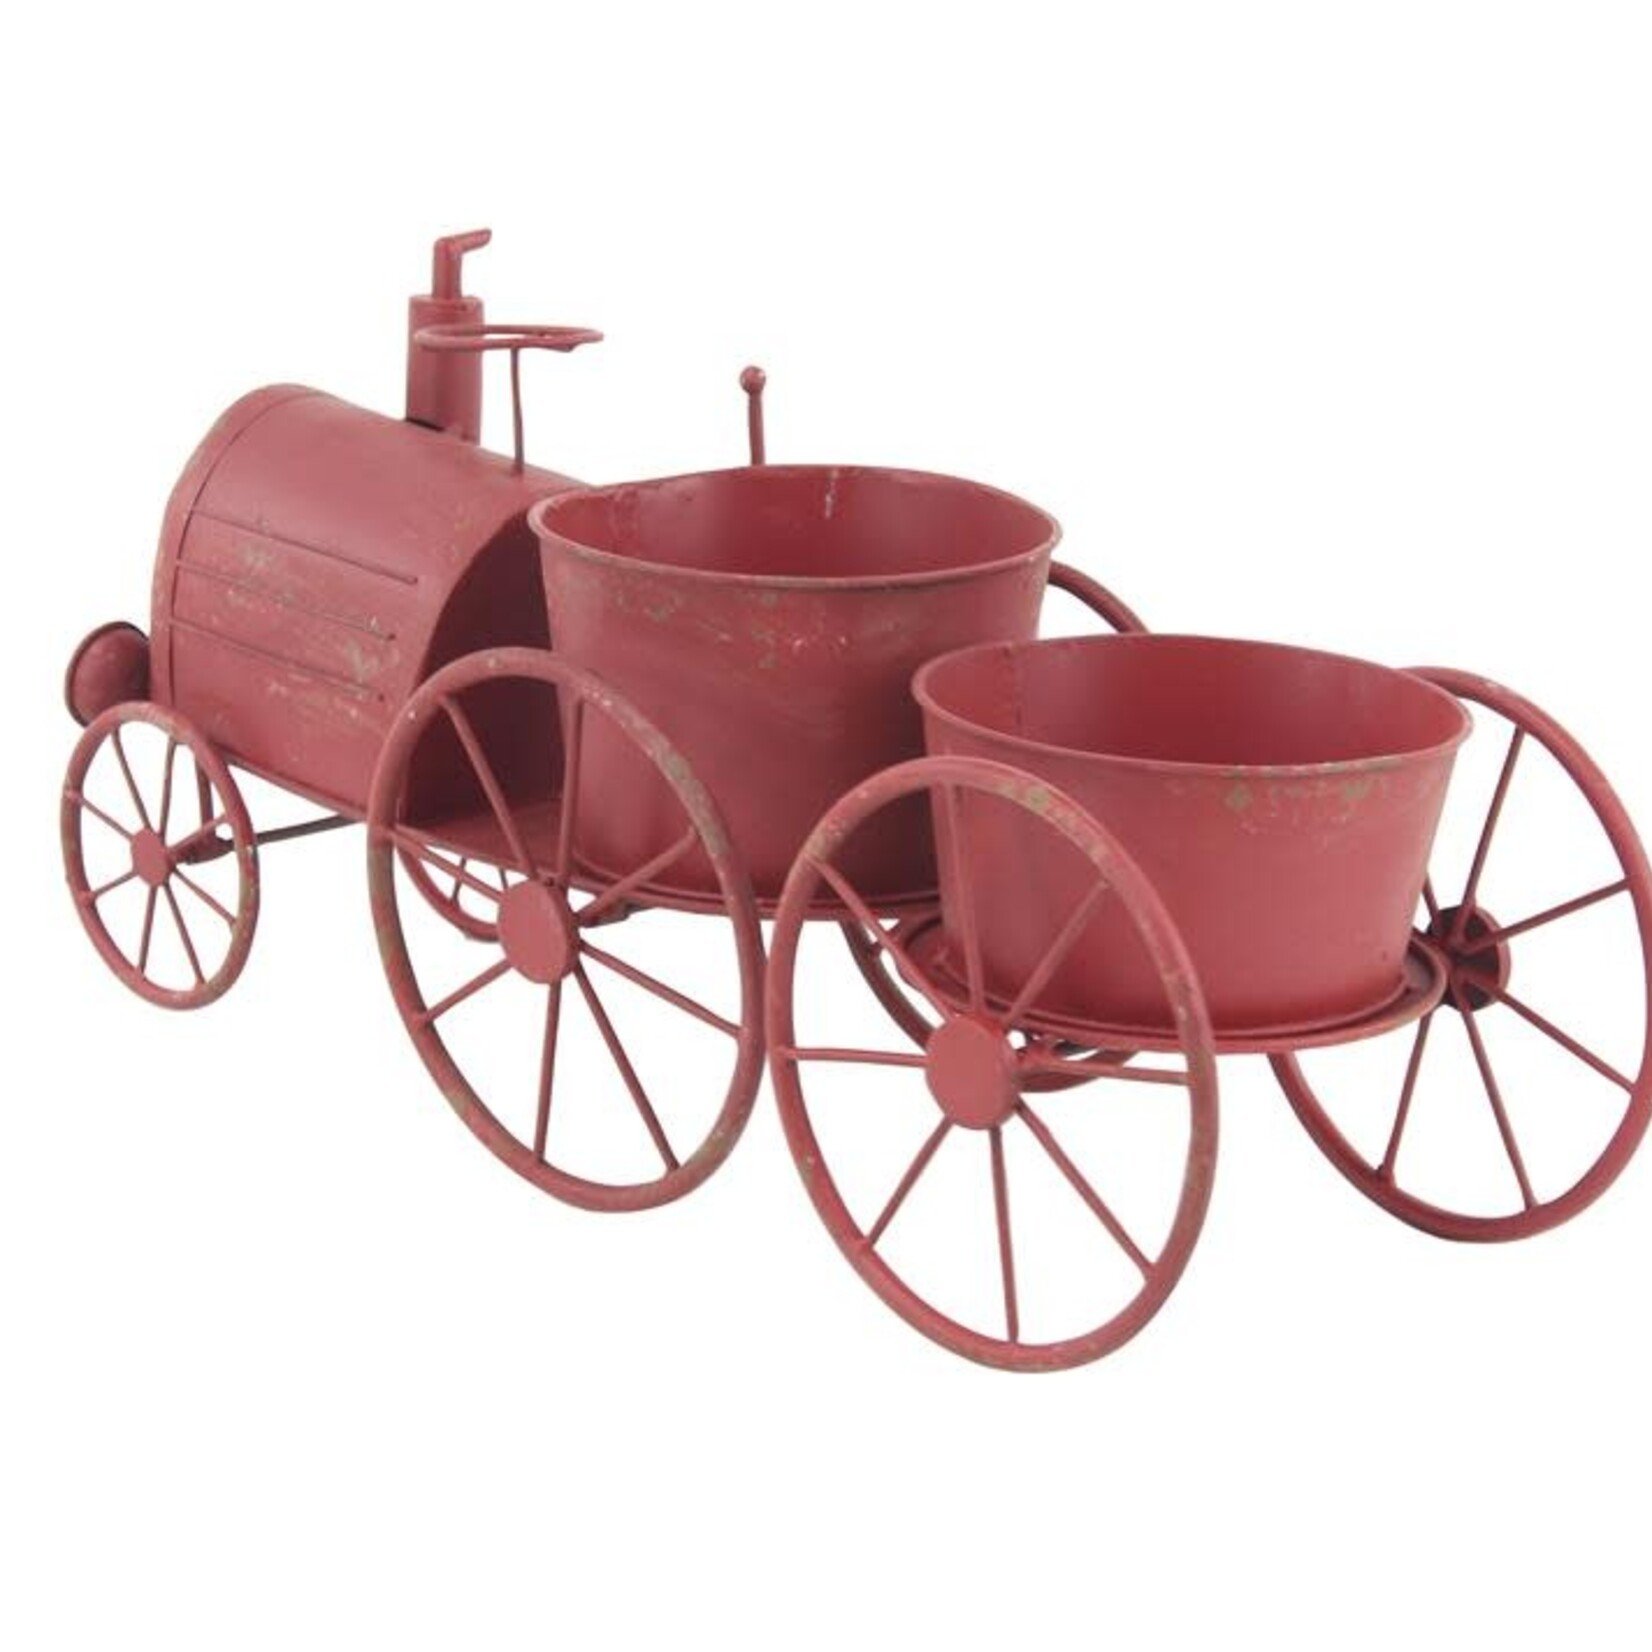 60% off was $90 now $36.00, 10”H X 22” RED METAL TRUCK PLANTER